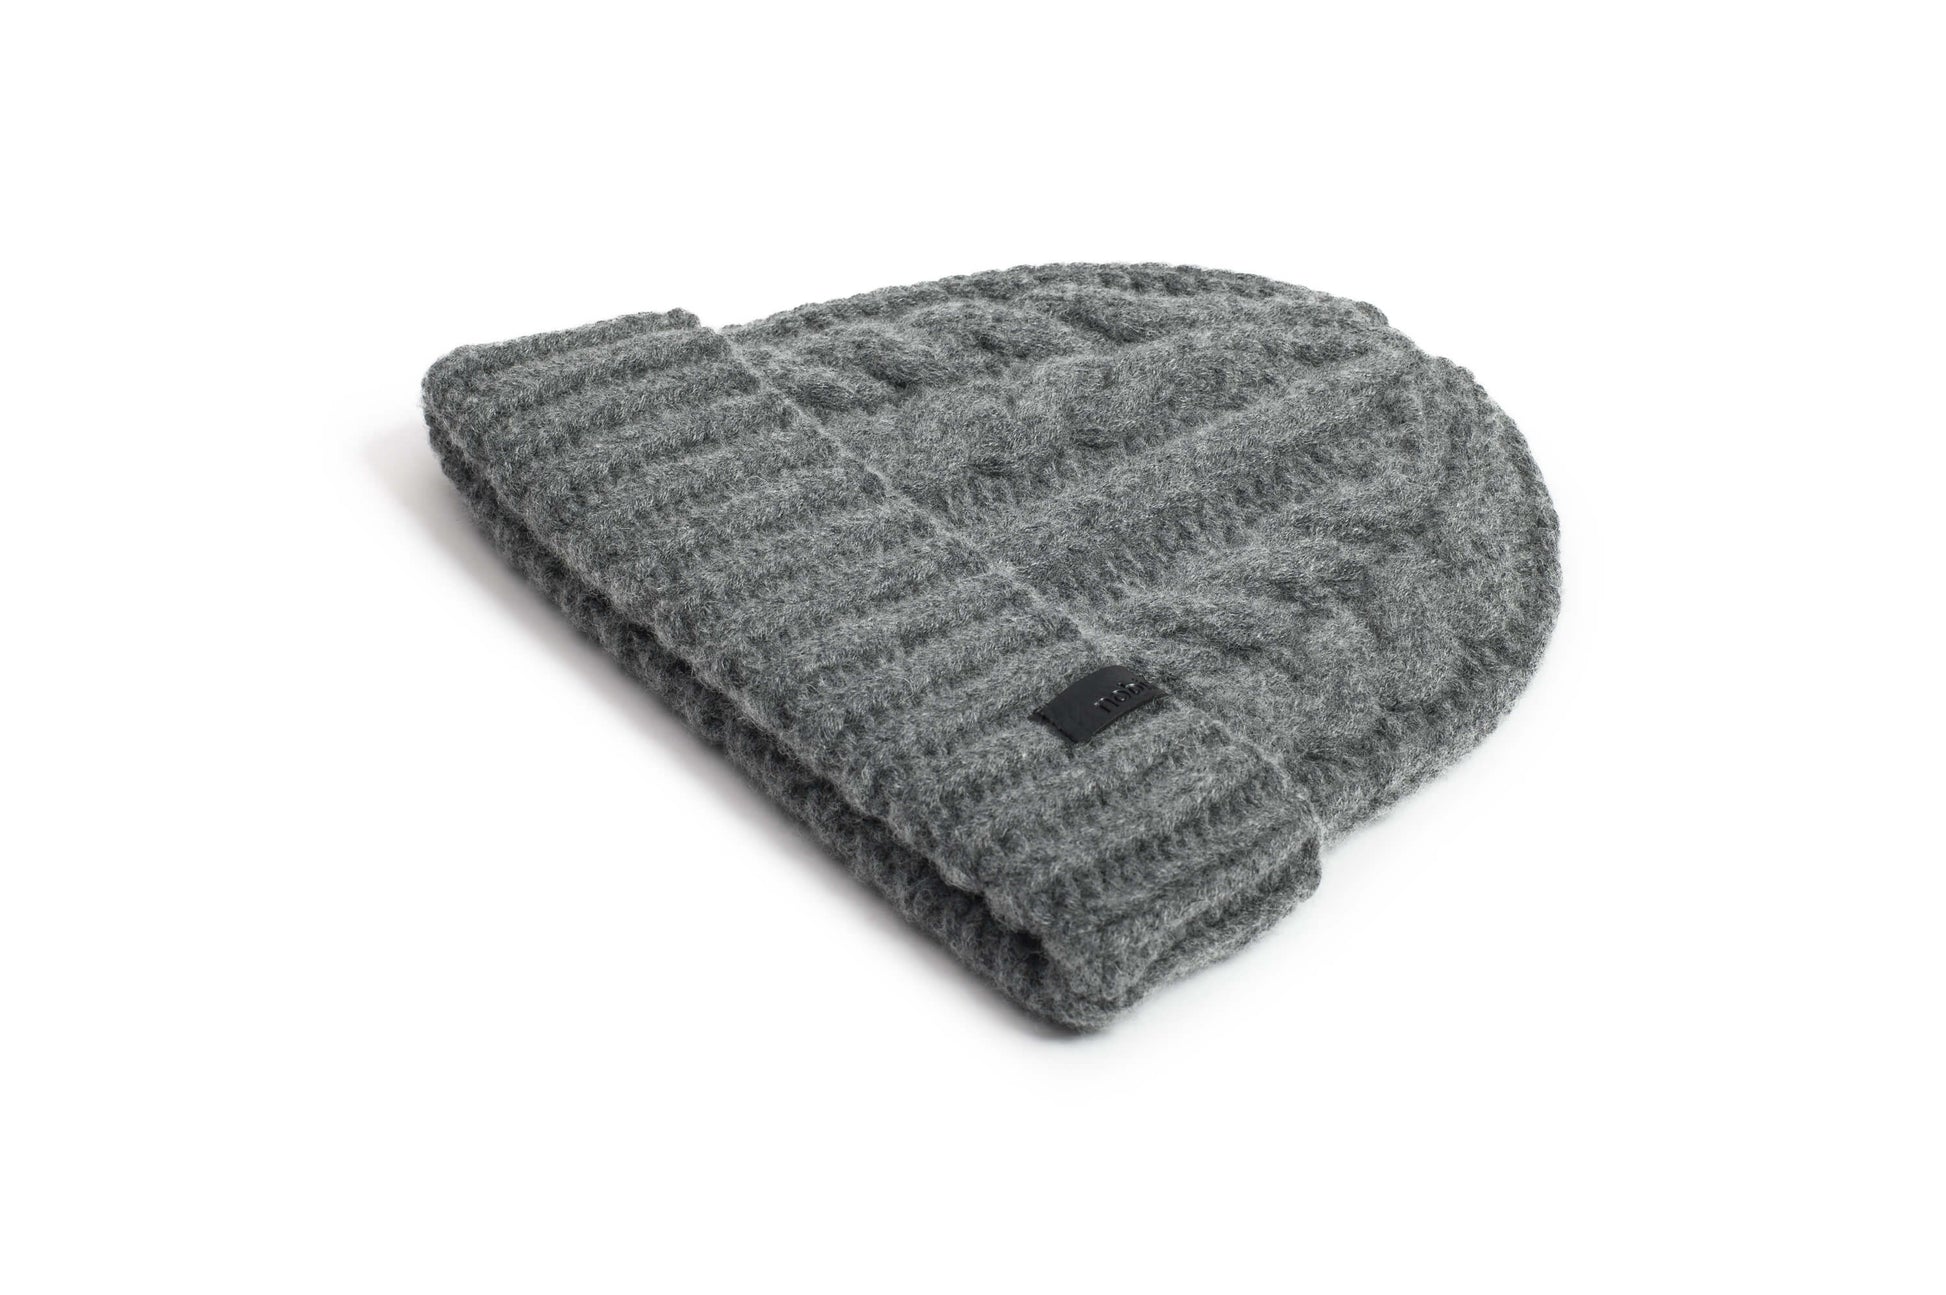 Dew Unisex Cable Knit Beanie in superfine merino wool and cashmere, and nobis leather label at cuff, in Storm